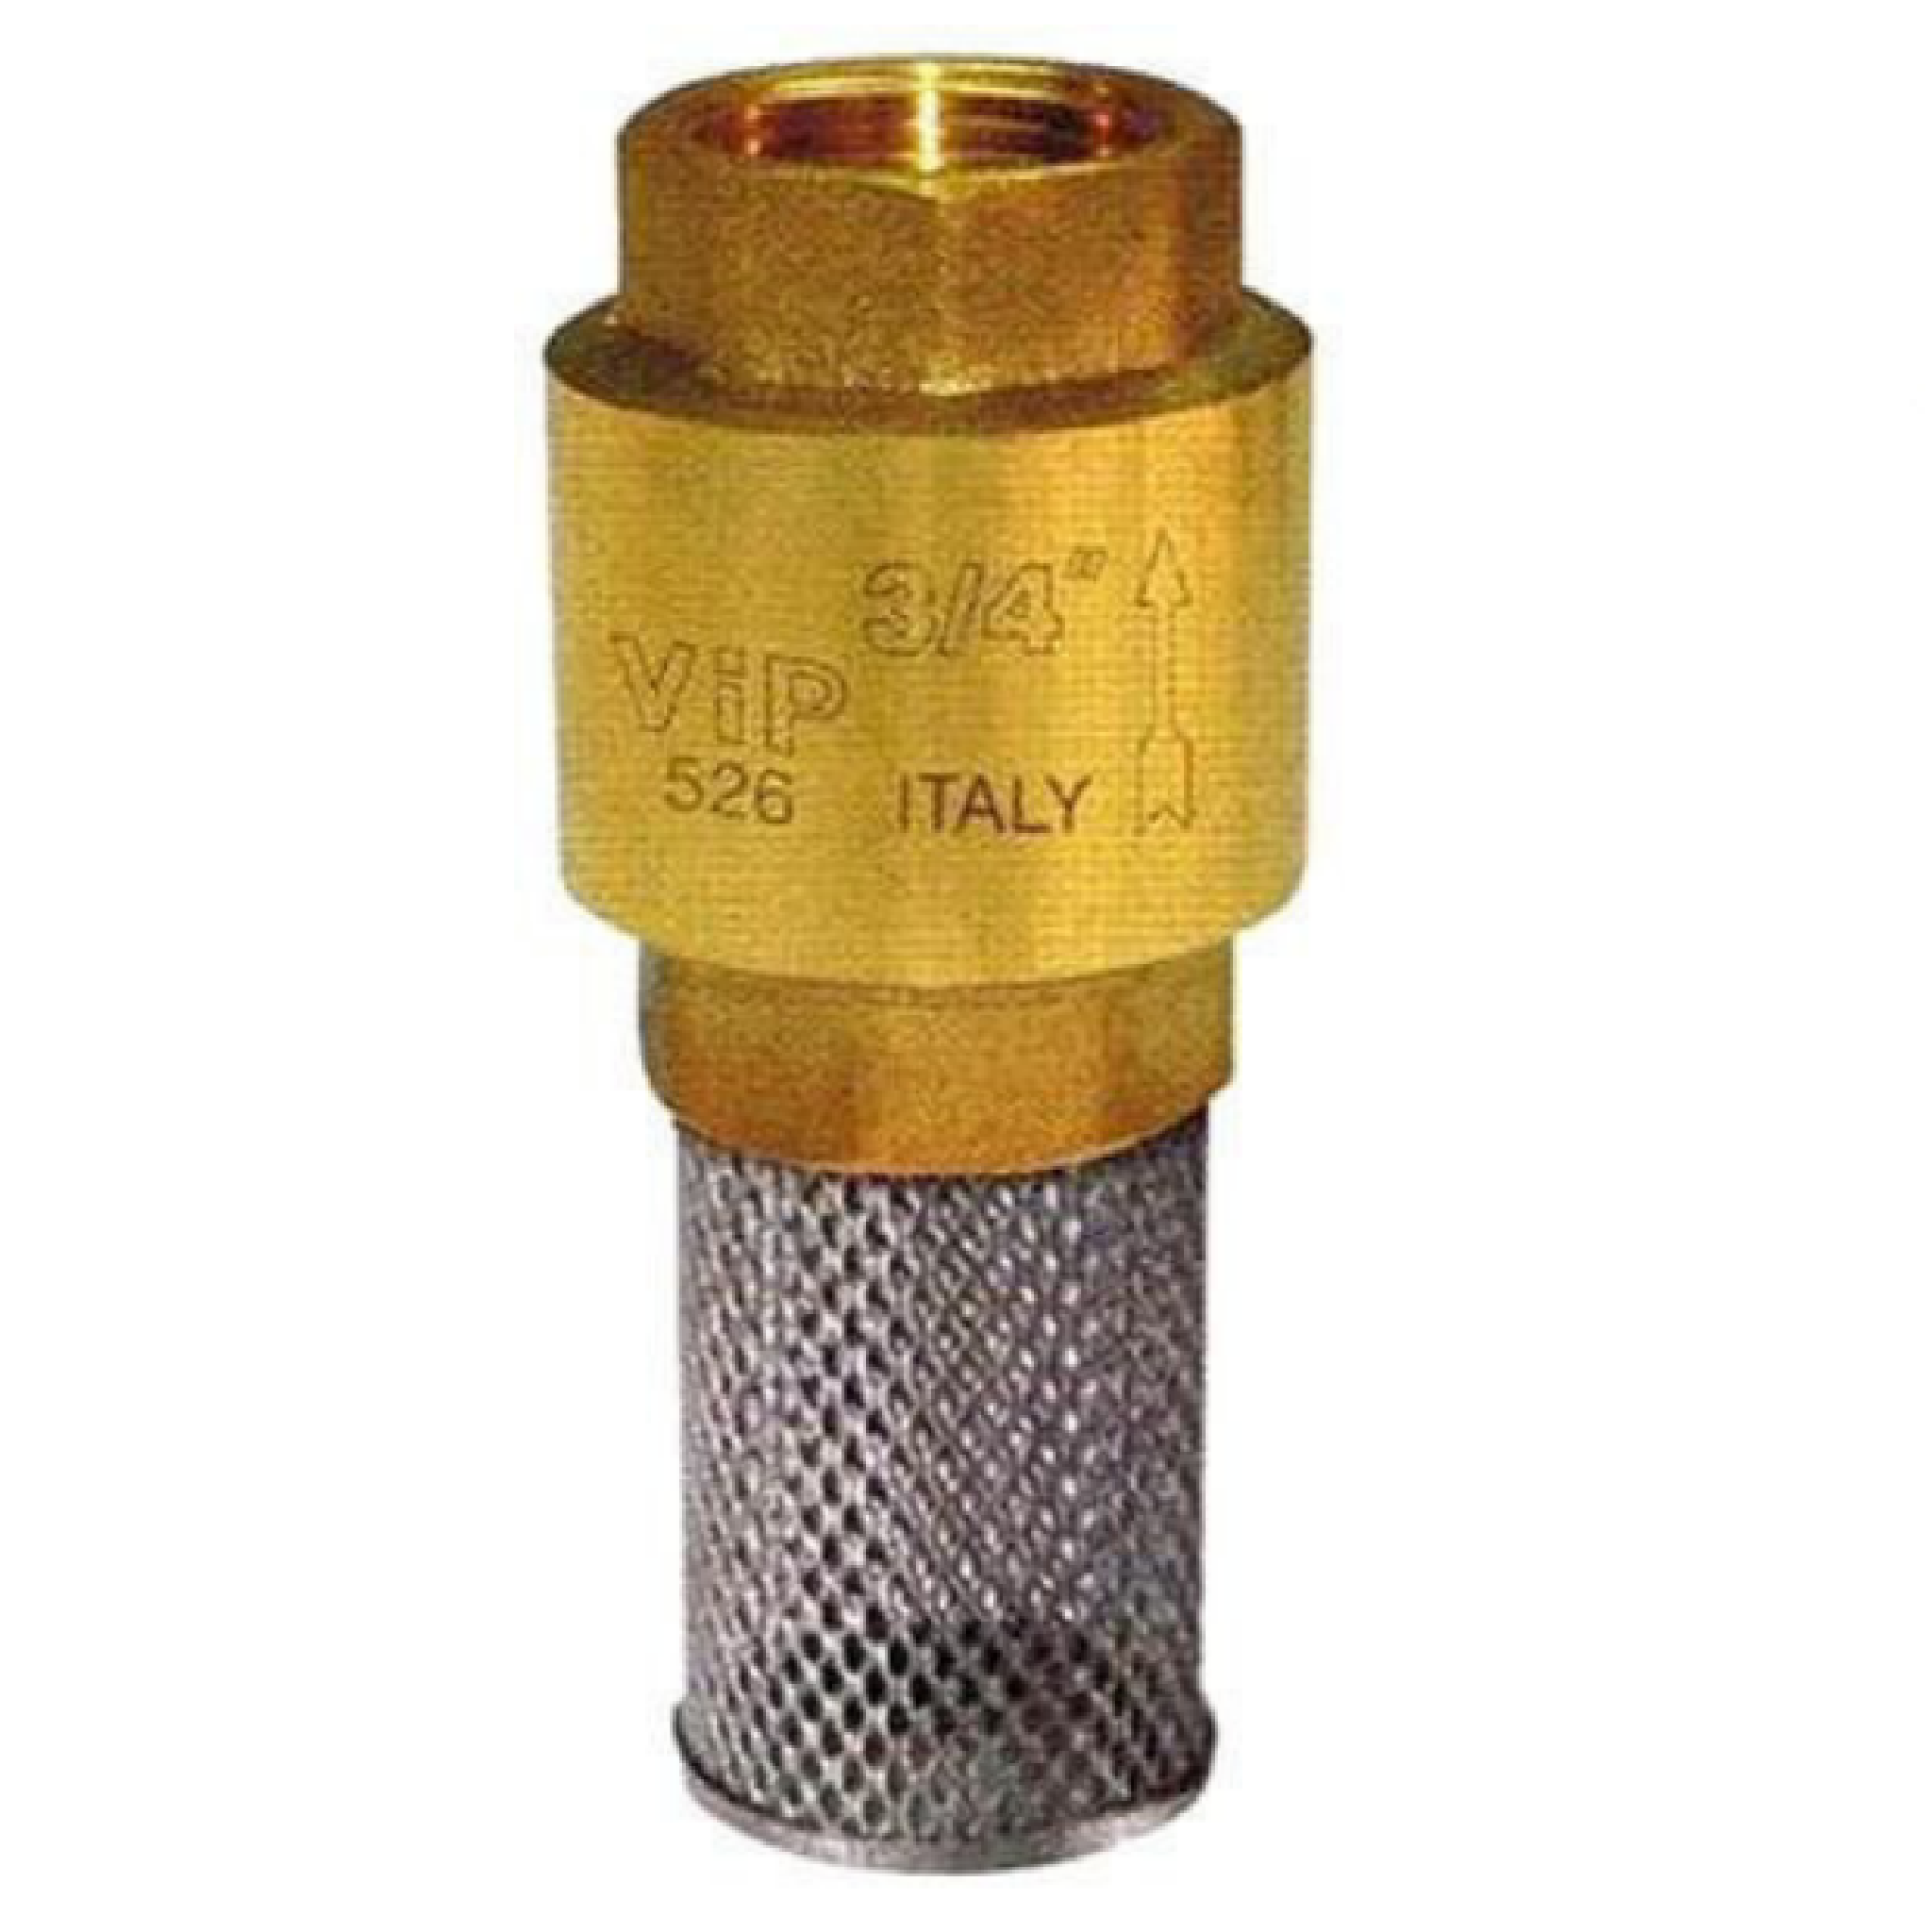 VIP BRASS FOOT VALVE With Stainless Steel Expanded Mesh 526